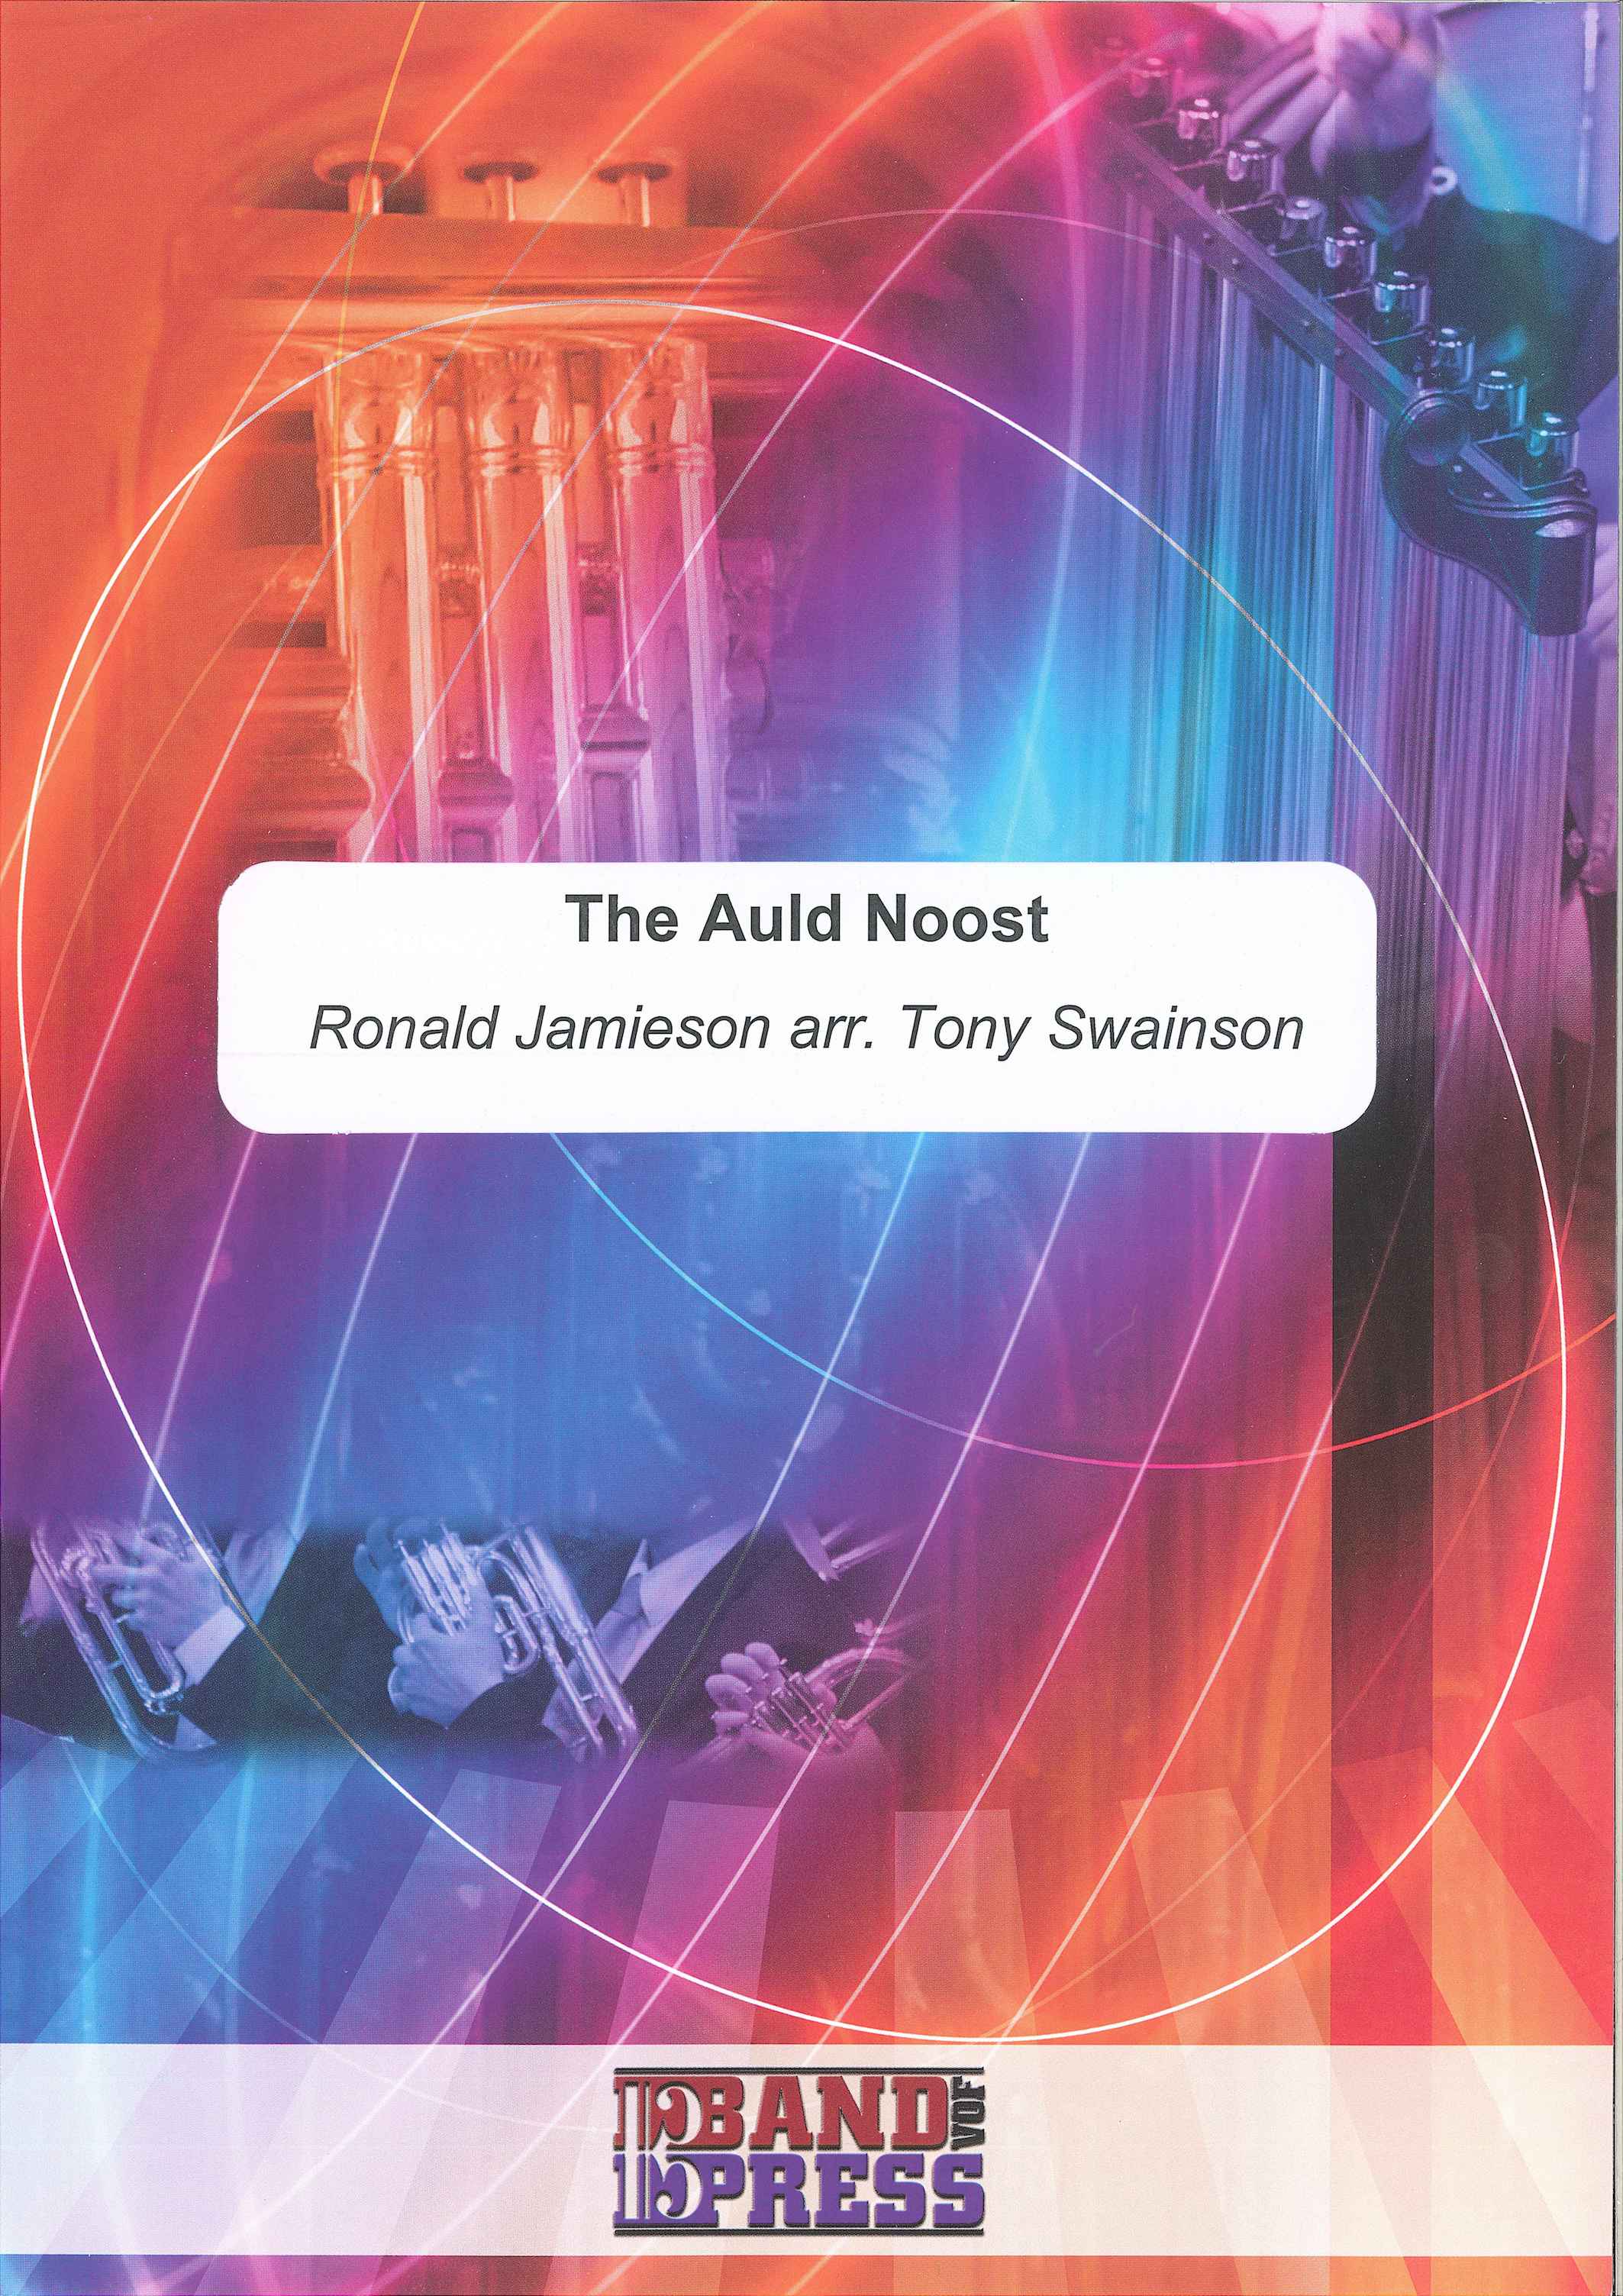 The Auld Noost - Ronald Jamieson Arr. Tony Swainson - Euph and Piano